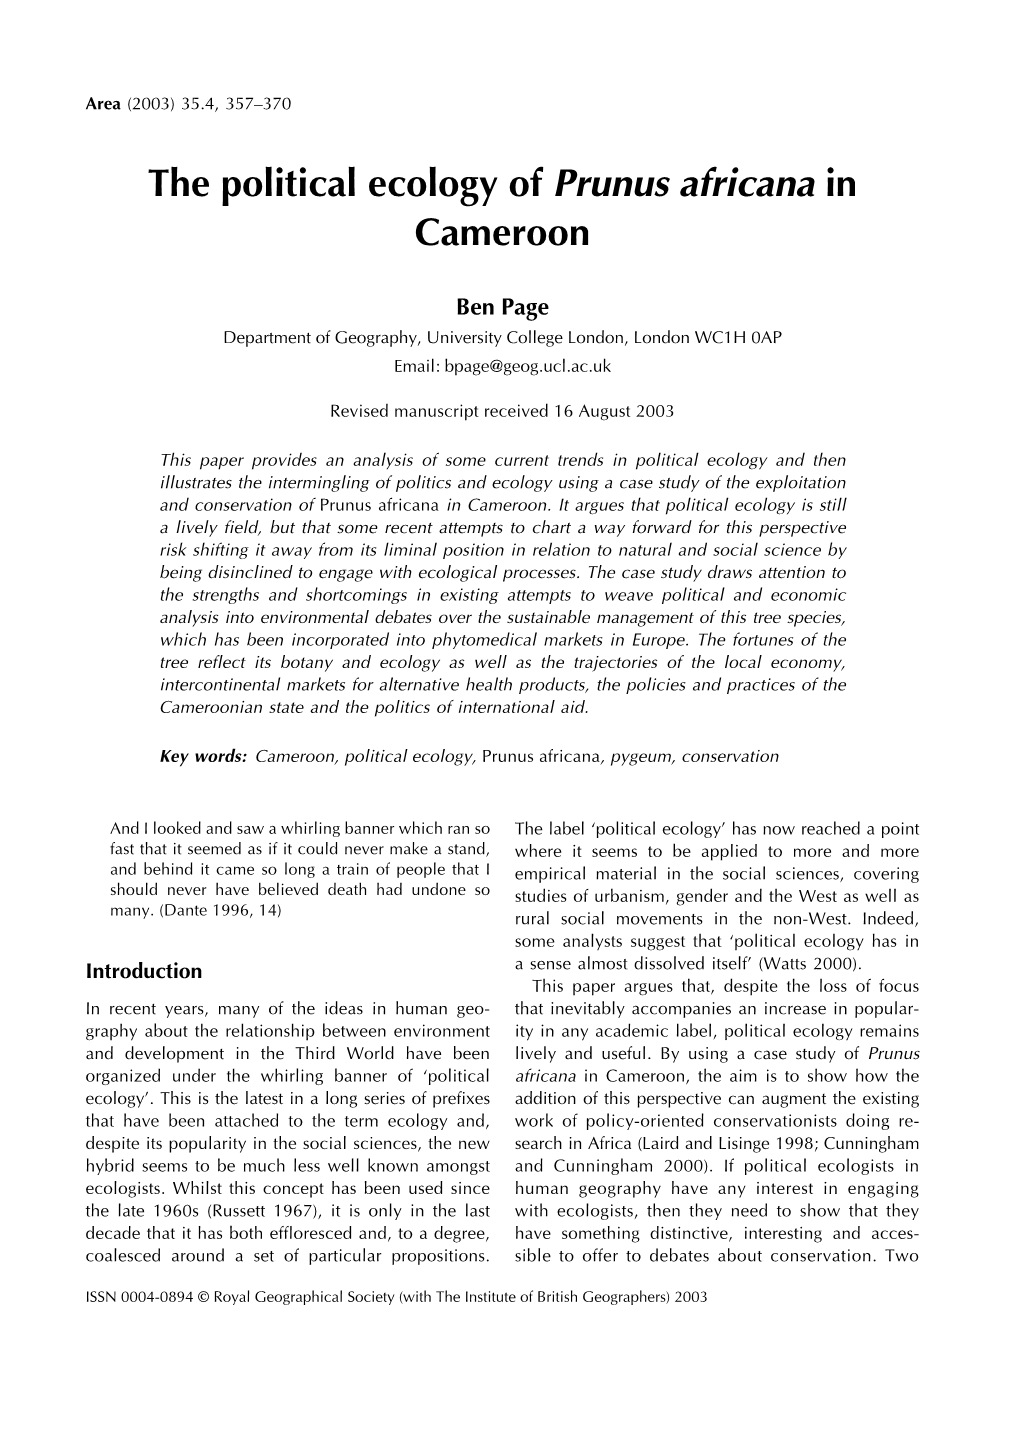 The Political Ecology of Prunus Africana in Cameroon